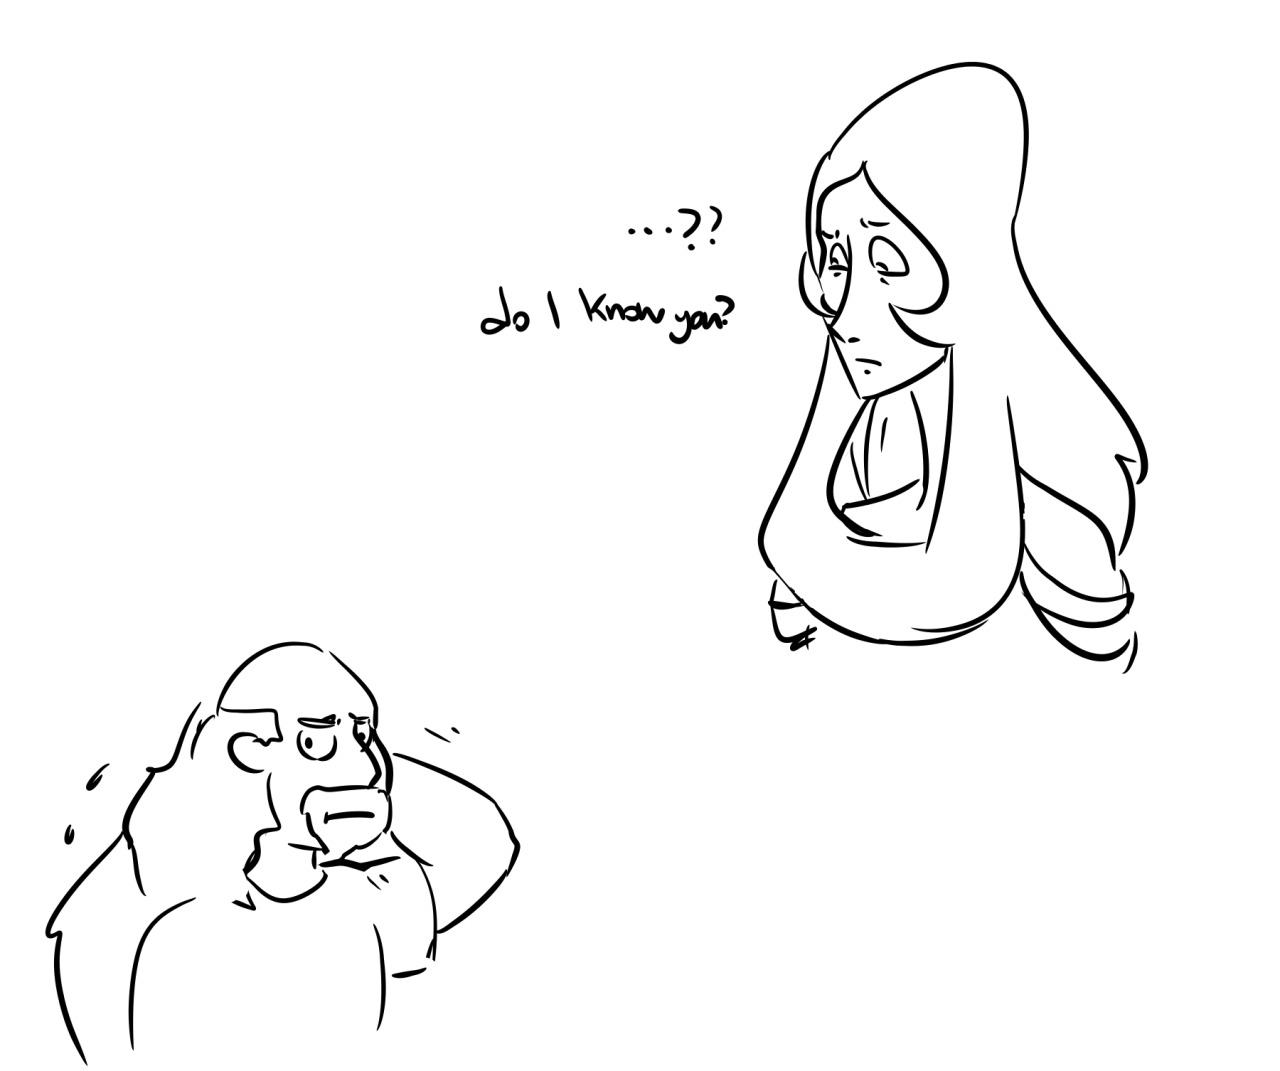 Anonymous said: For your request: what would happen if Blue Diamond met Greg again? Answer: I like how you can tell the exact moment when my hand actually started to warm up a little